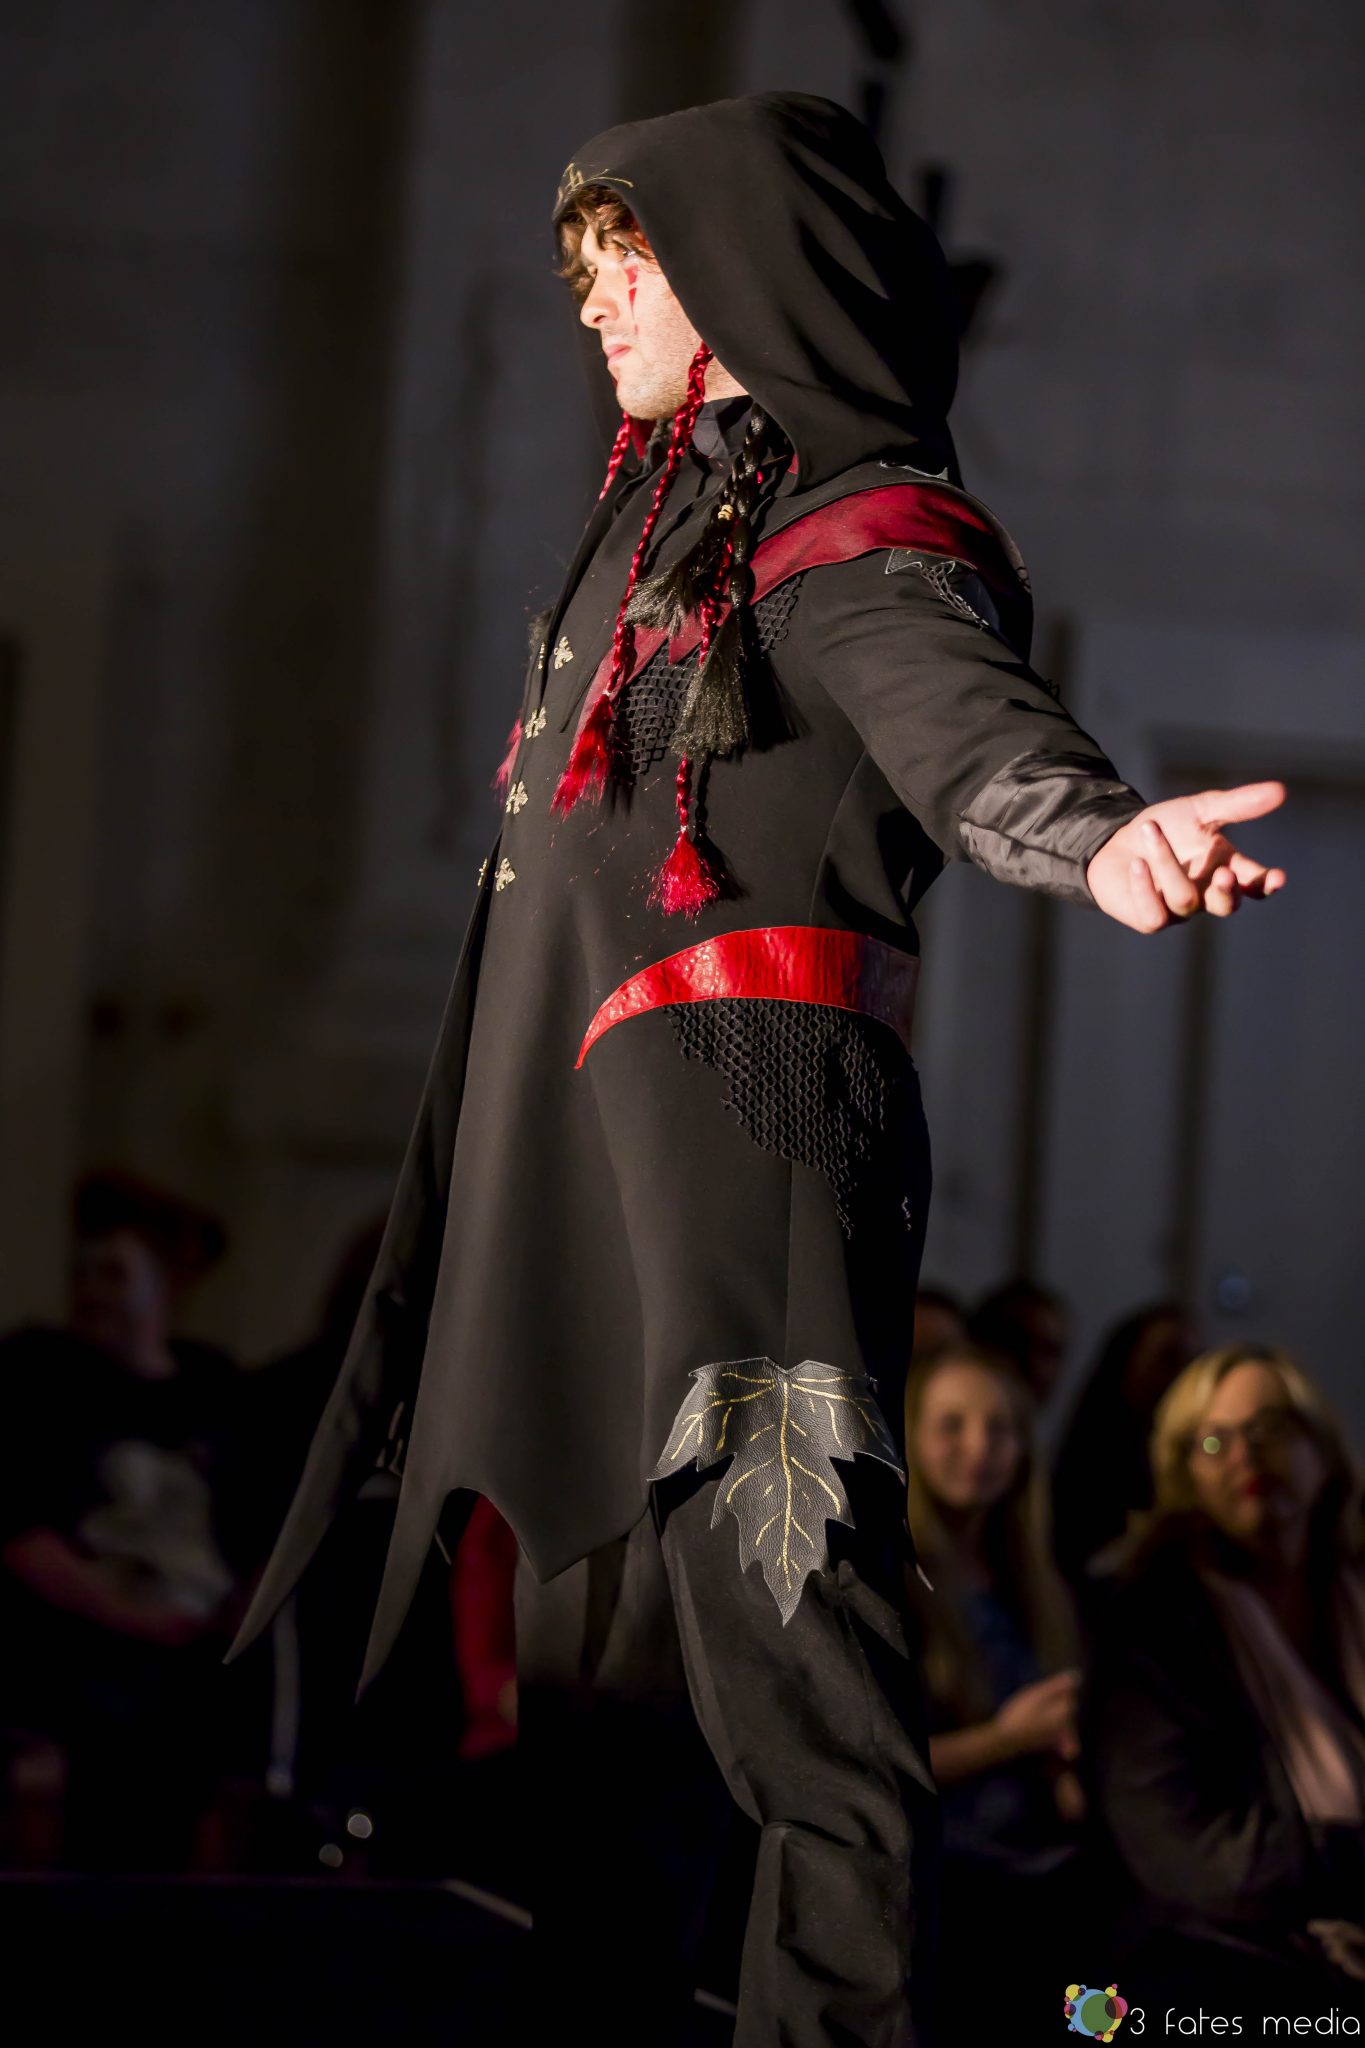 Red and black elven coat with leather leaves